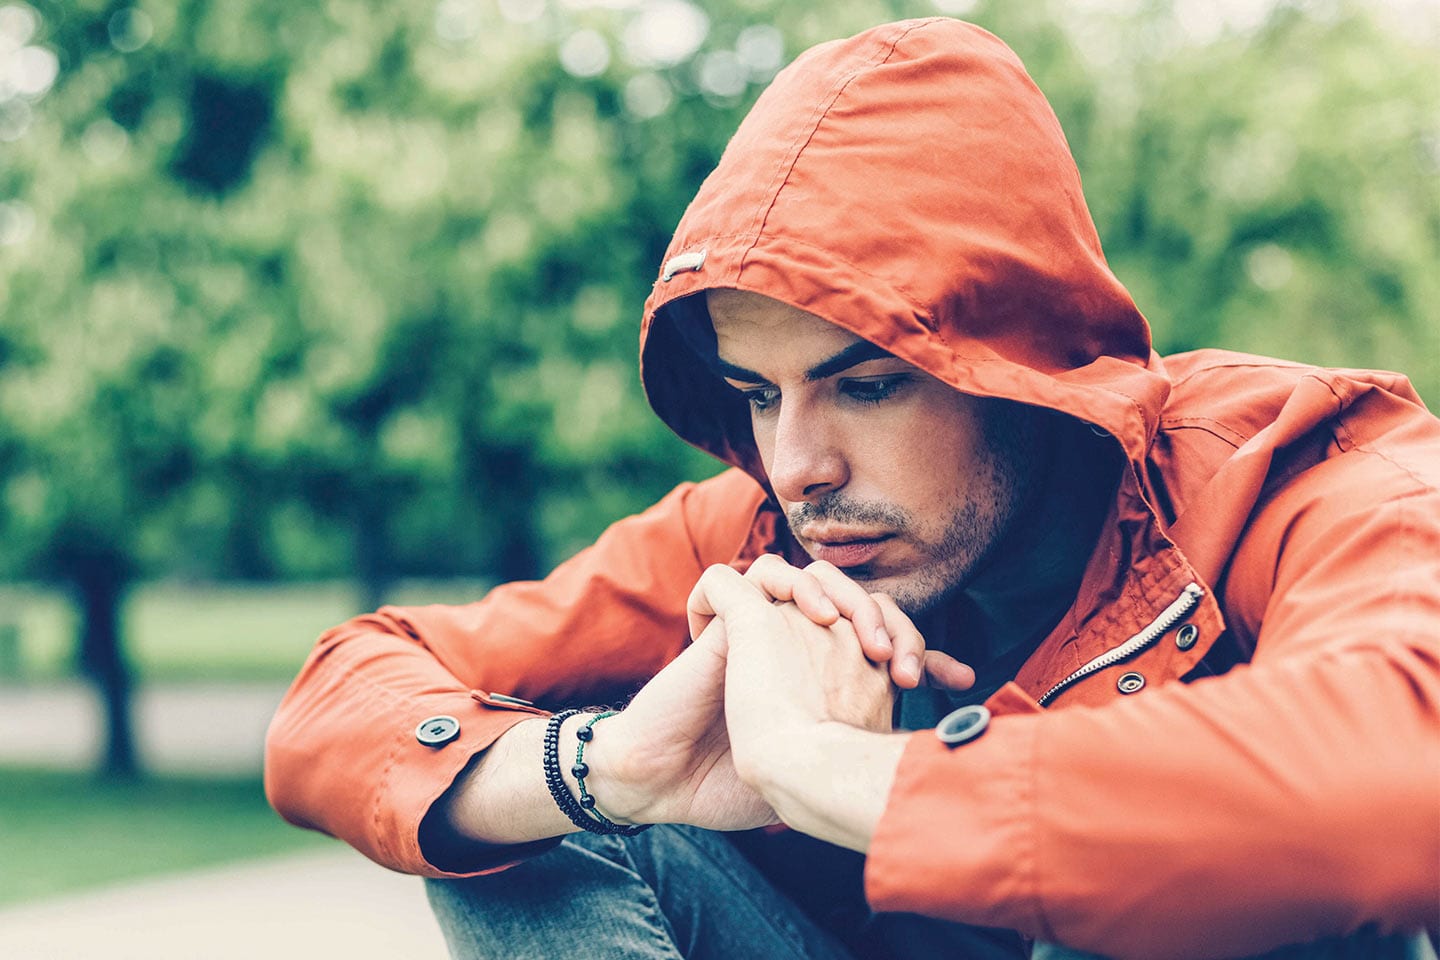 Man struggling with PTSD with a red rain jacket on